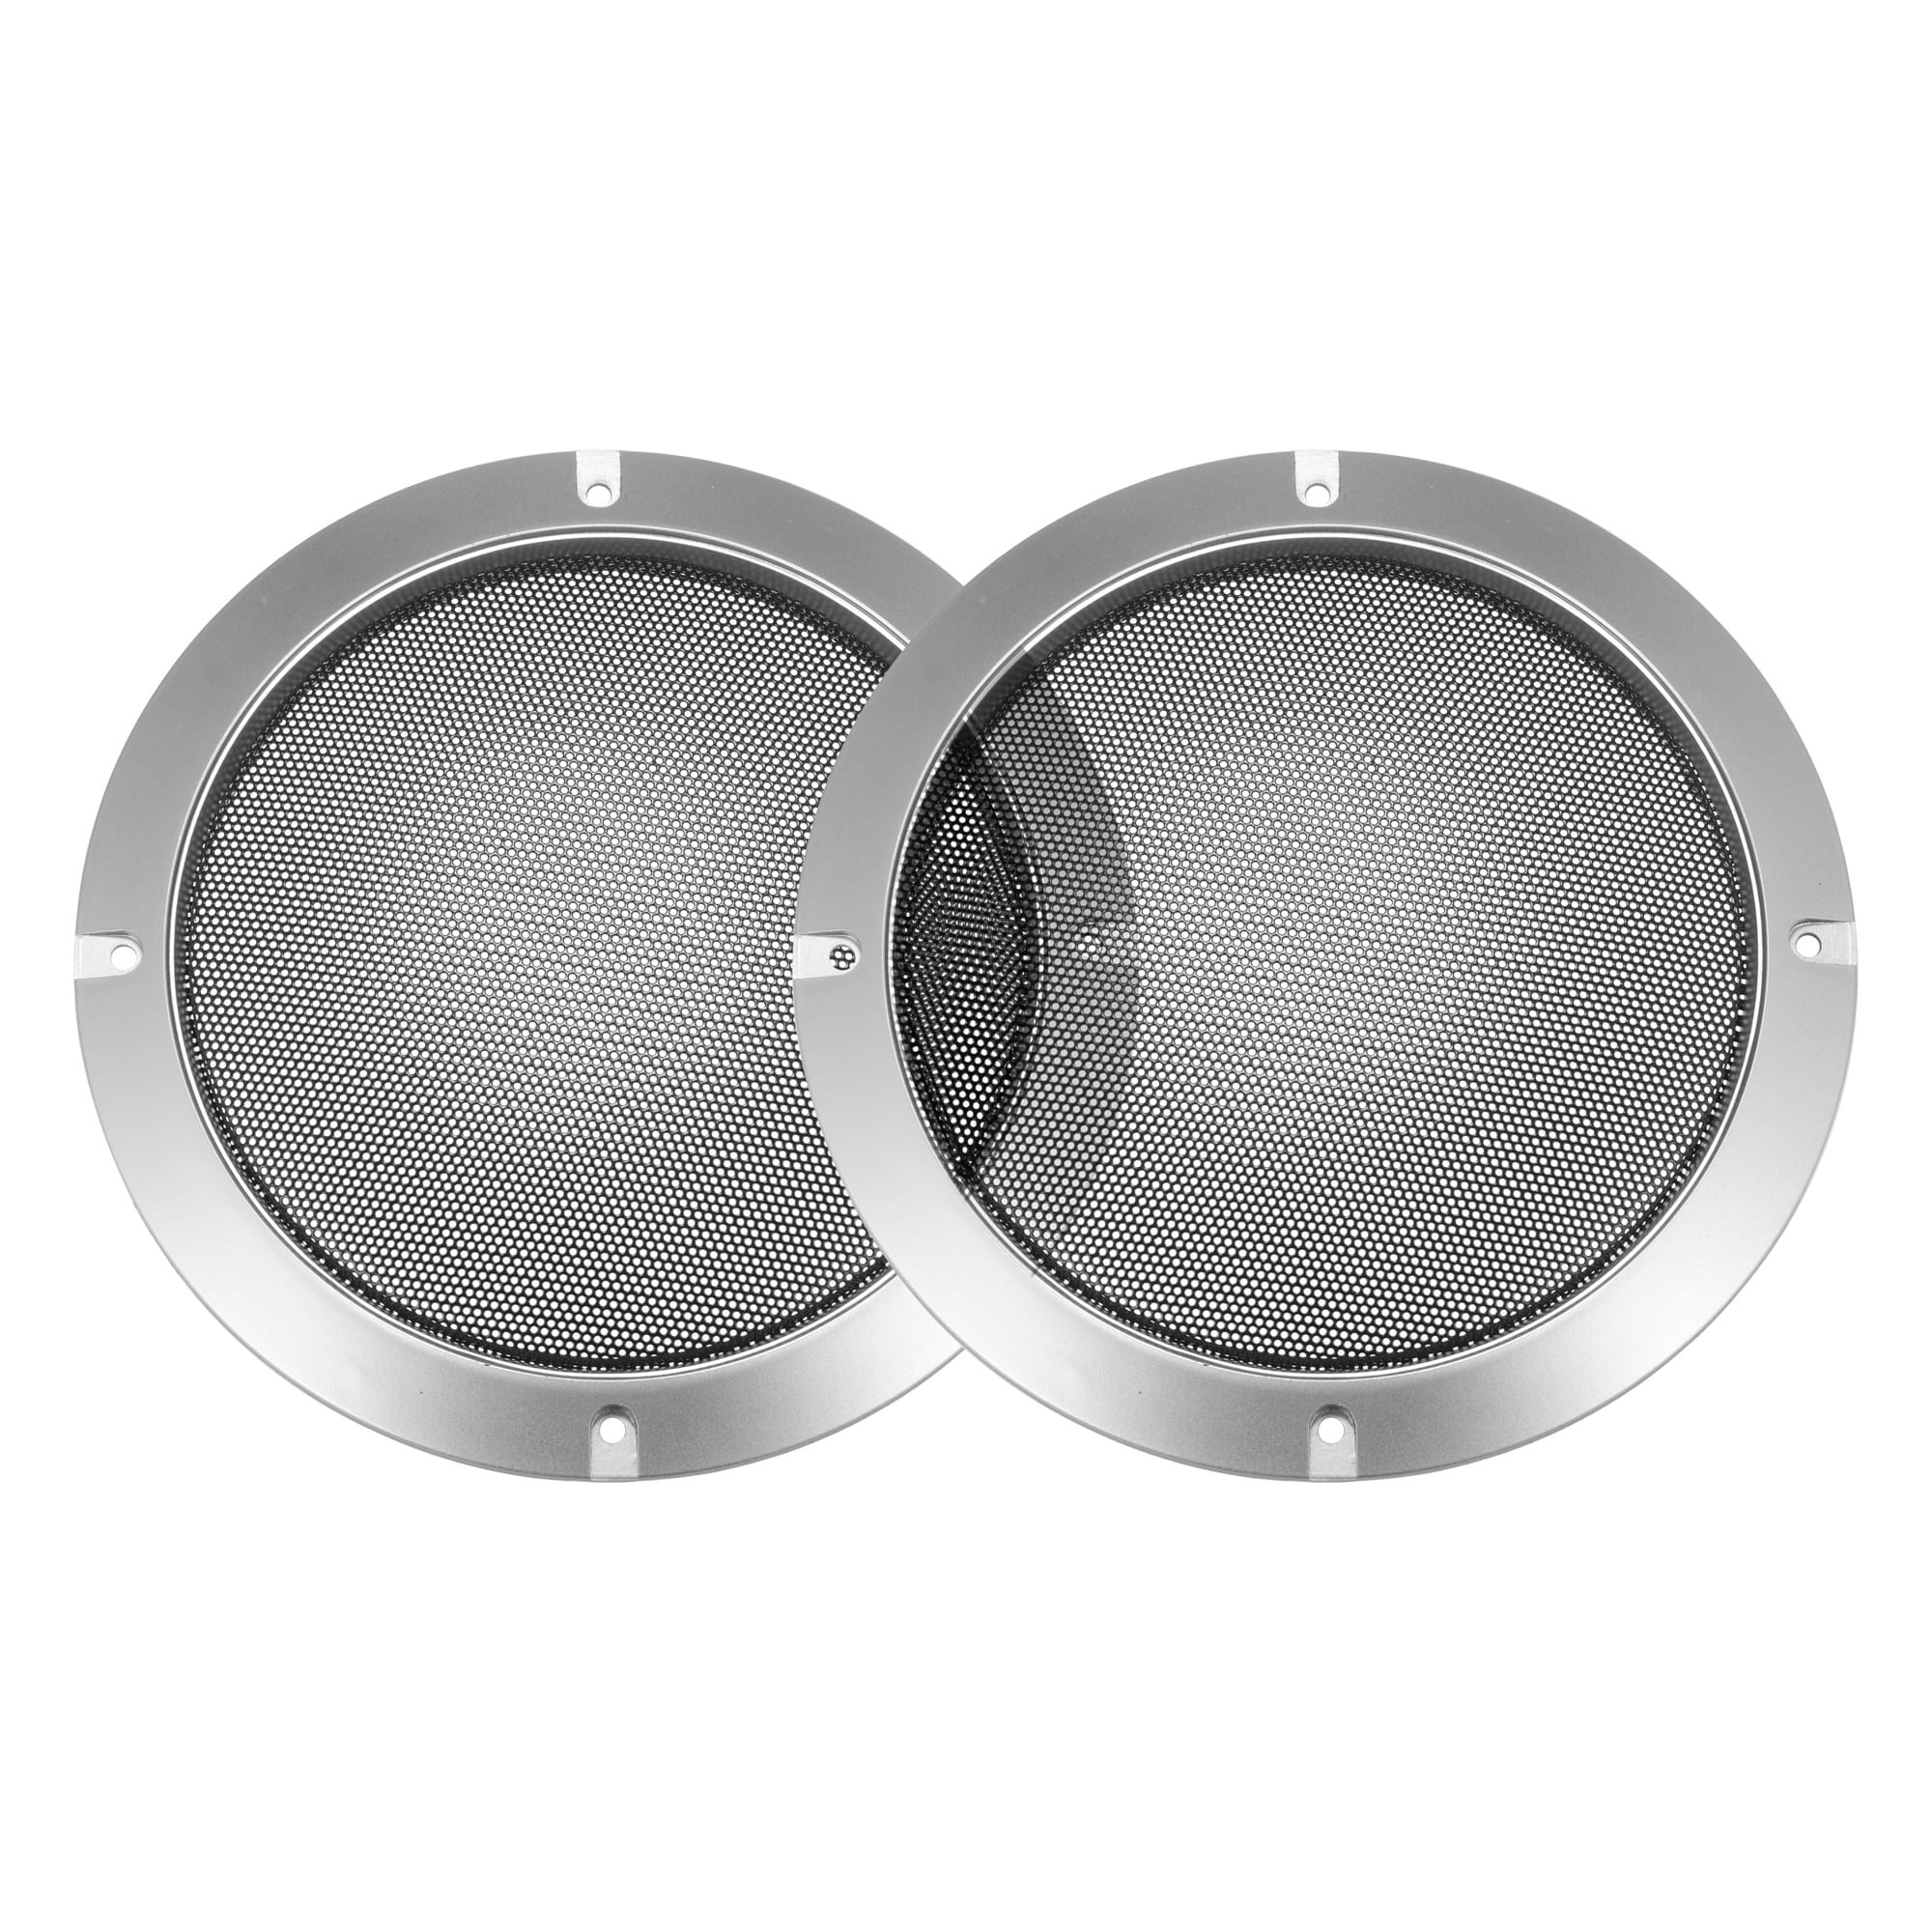 6.5" Round Waffle Style Woofer Subwoofer Speaker Grille Cover w/ 4 Clamps 